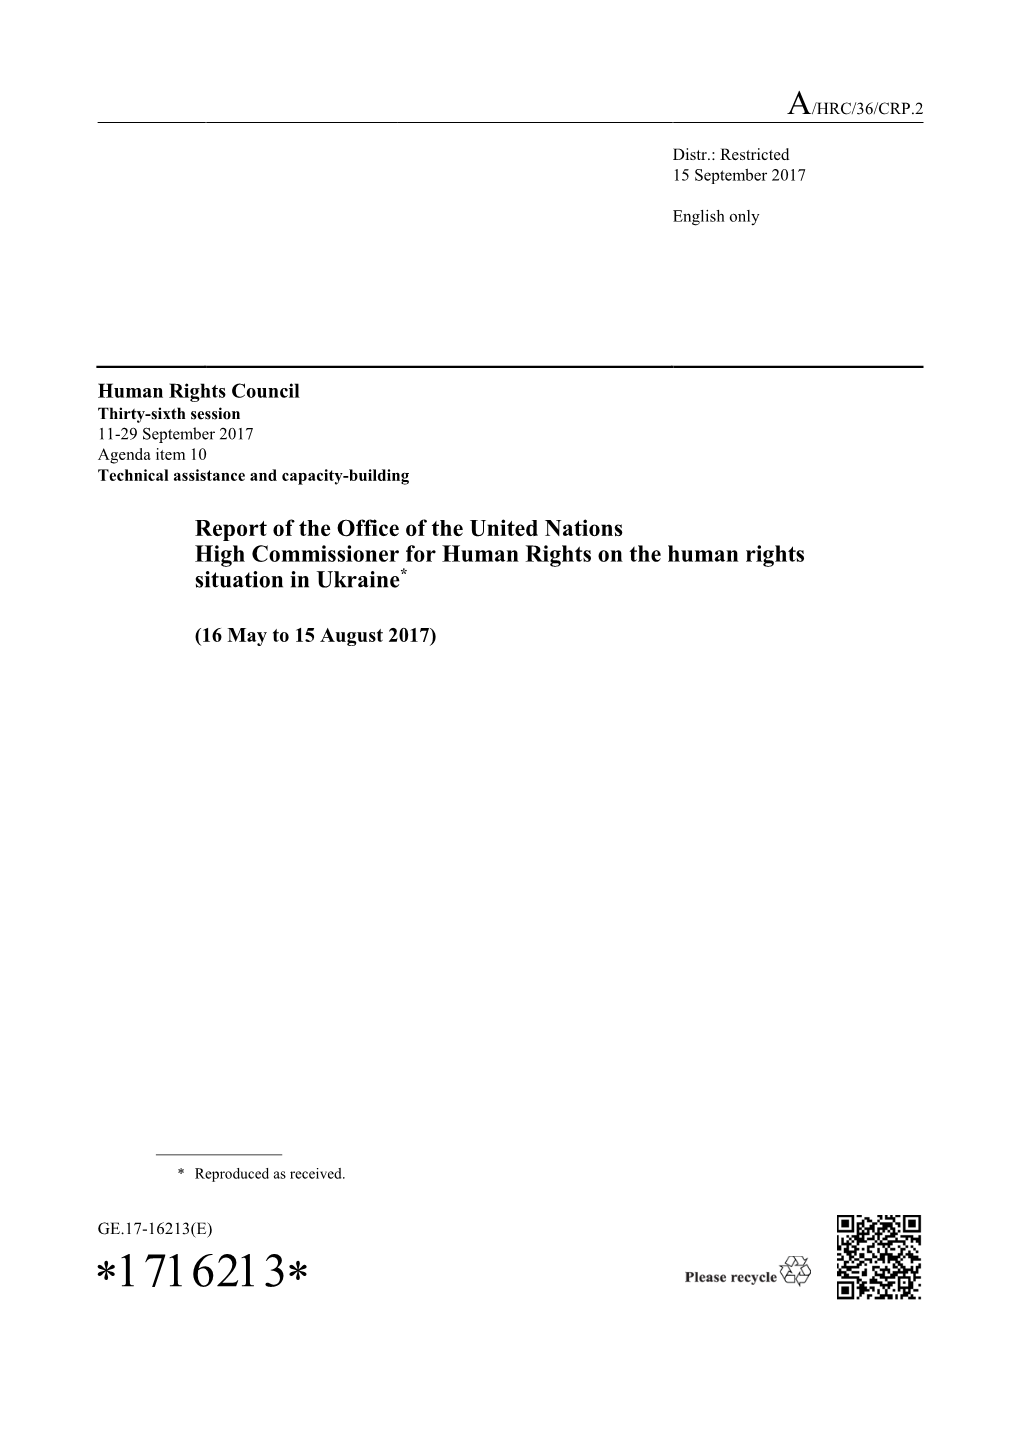 Report of the Office of the United Nations High Commissioner for Human Rights on the Human Rights Situation in Ukraine*